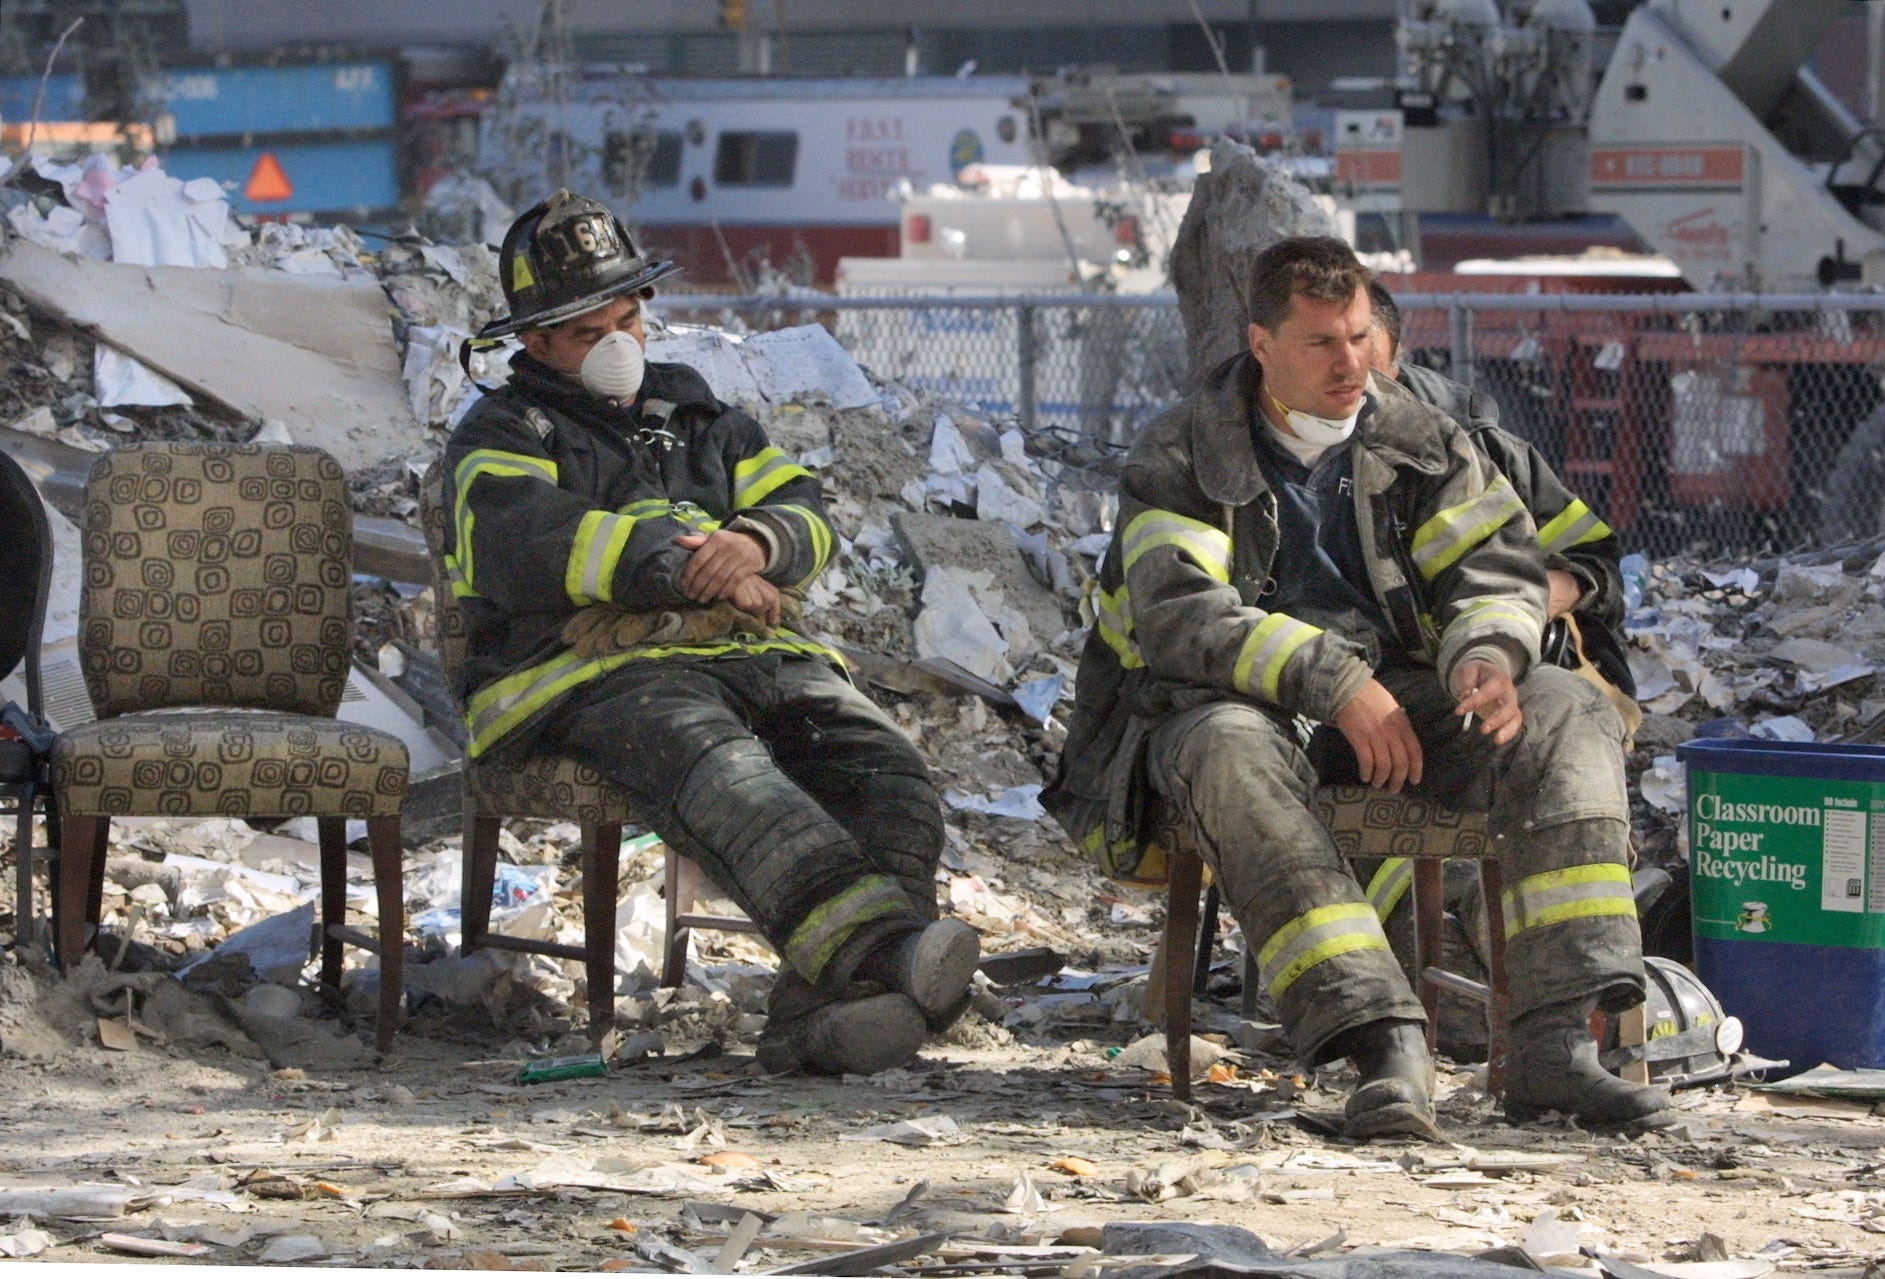 Ohio State Studying WTC Dust Effects On 9 11 First Responders